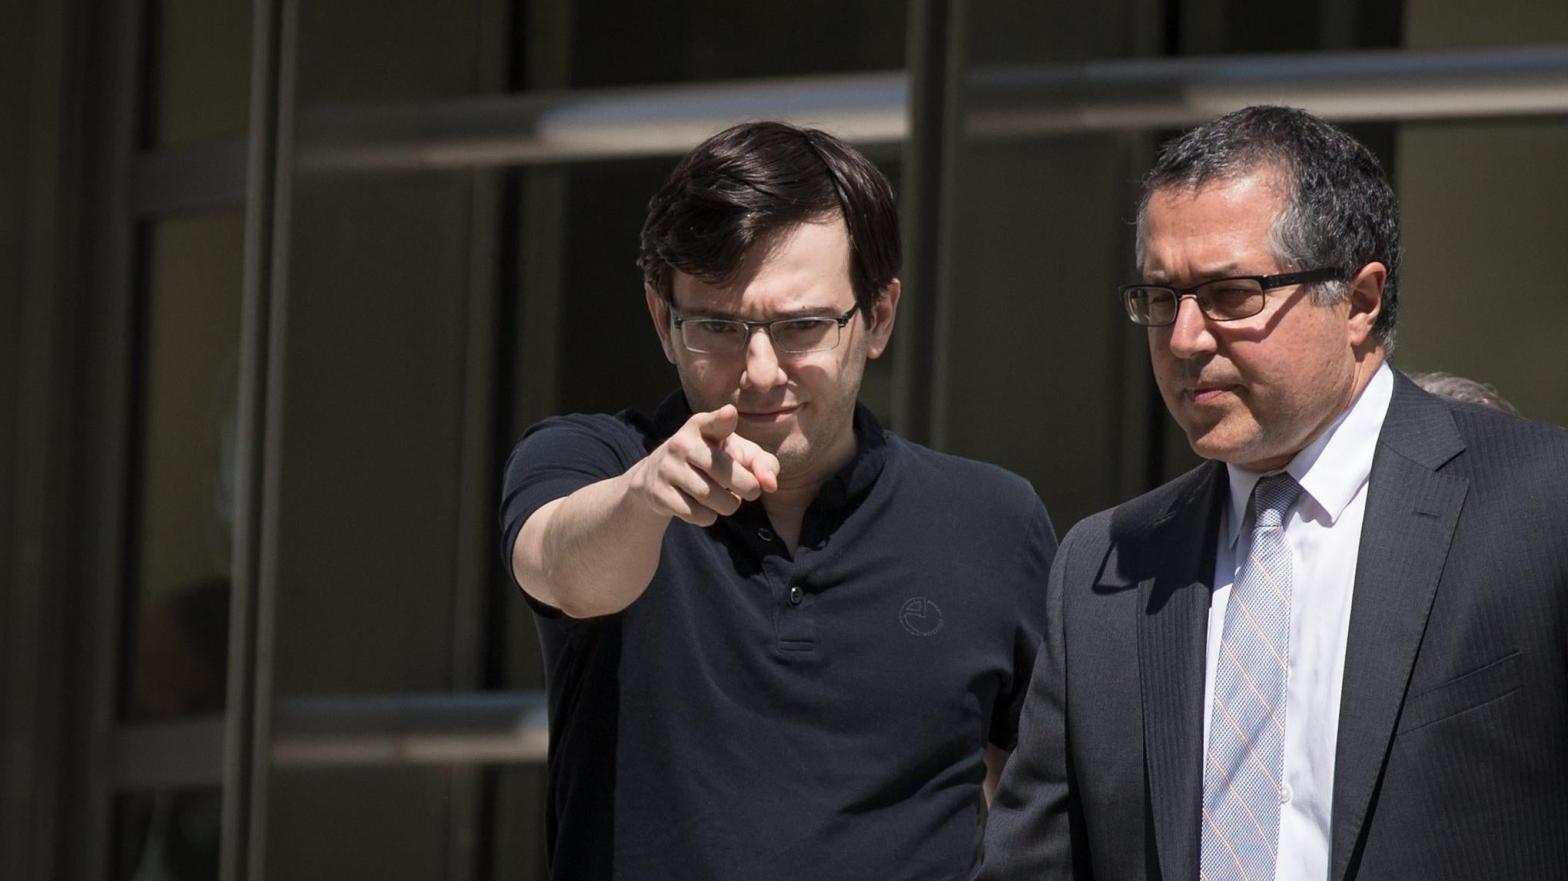 Martin Shkreli made headlines in 2015 when he raised the price of an antiparasitic drug to $US750 ($1,041) per pill. (Photo: Drew Angerer, Getty Images)